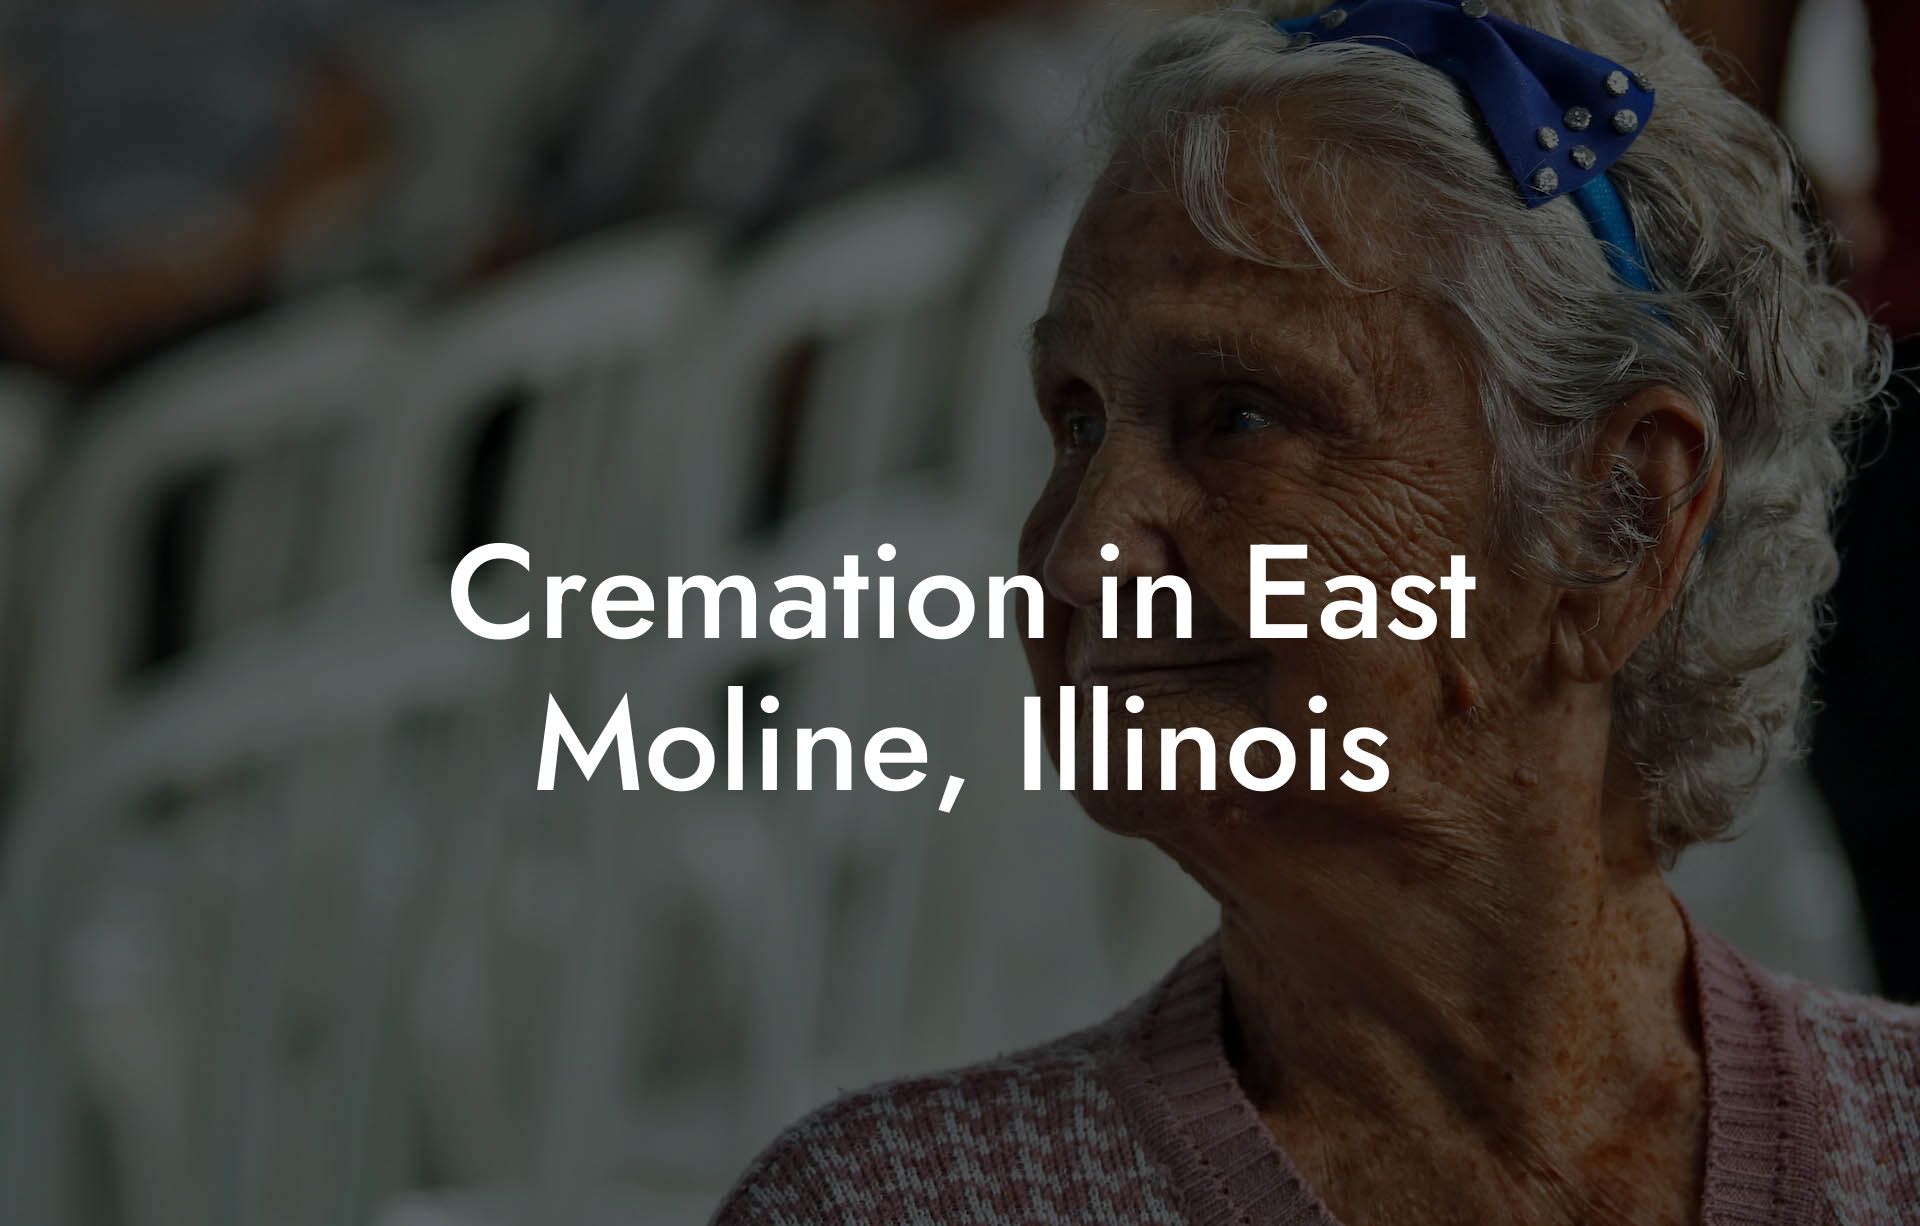 Cremation in East Moline, Illinois